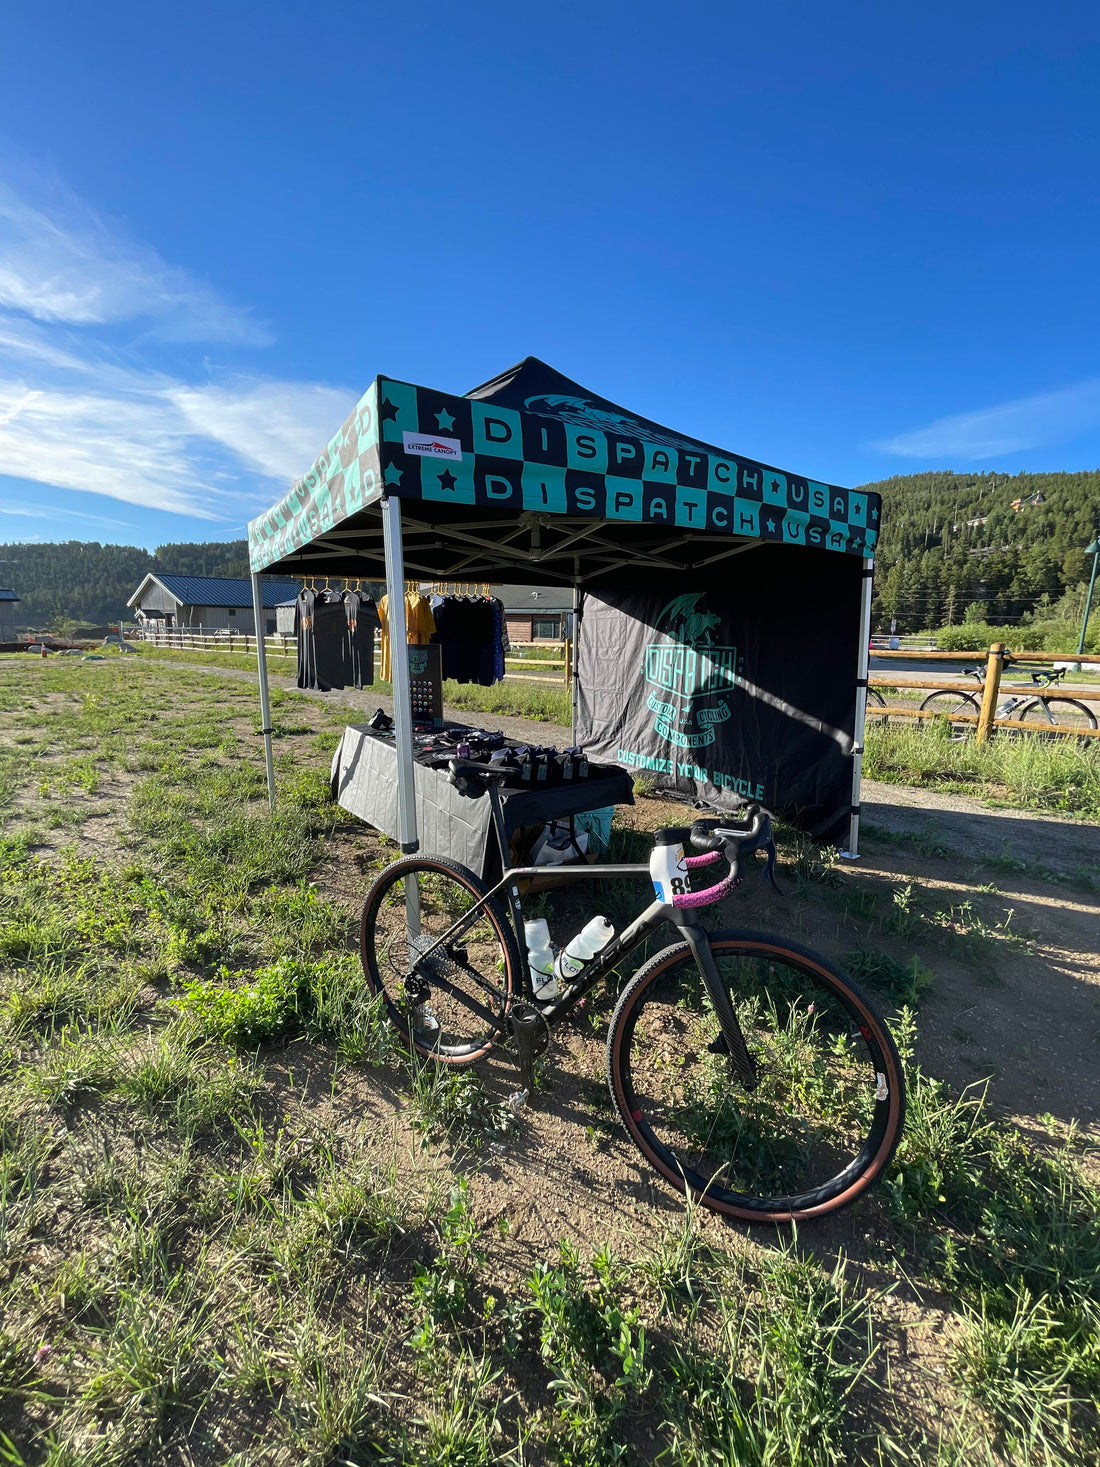 Dispatch Custom Cycling Components at Ned Gravel bicycle race event July 2022 in Nederland Colorado